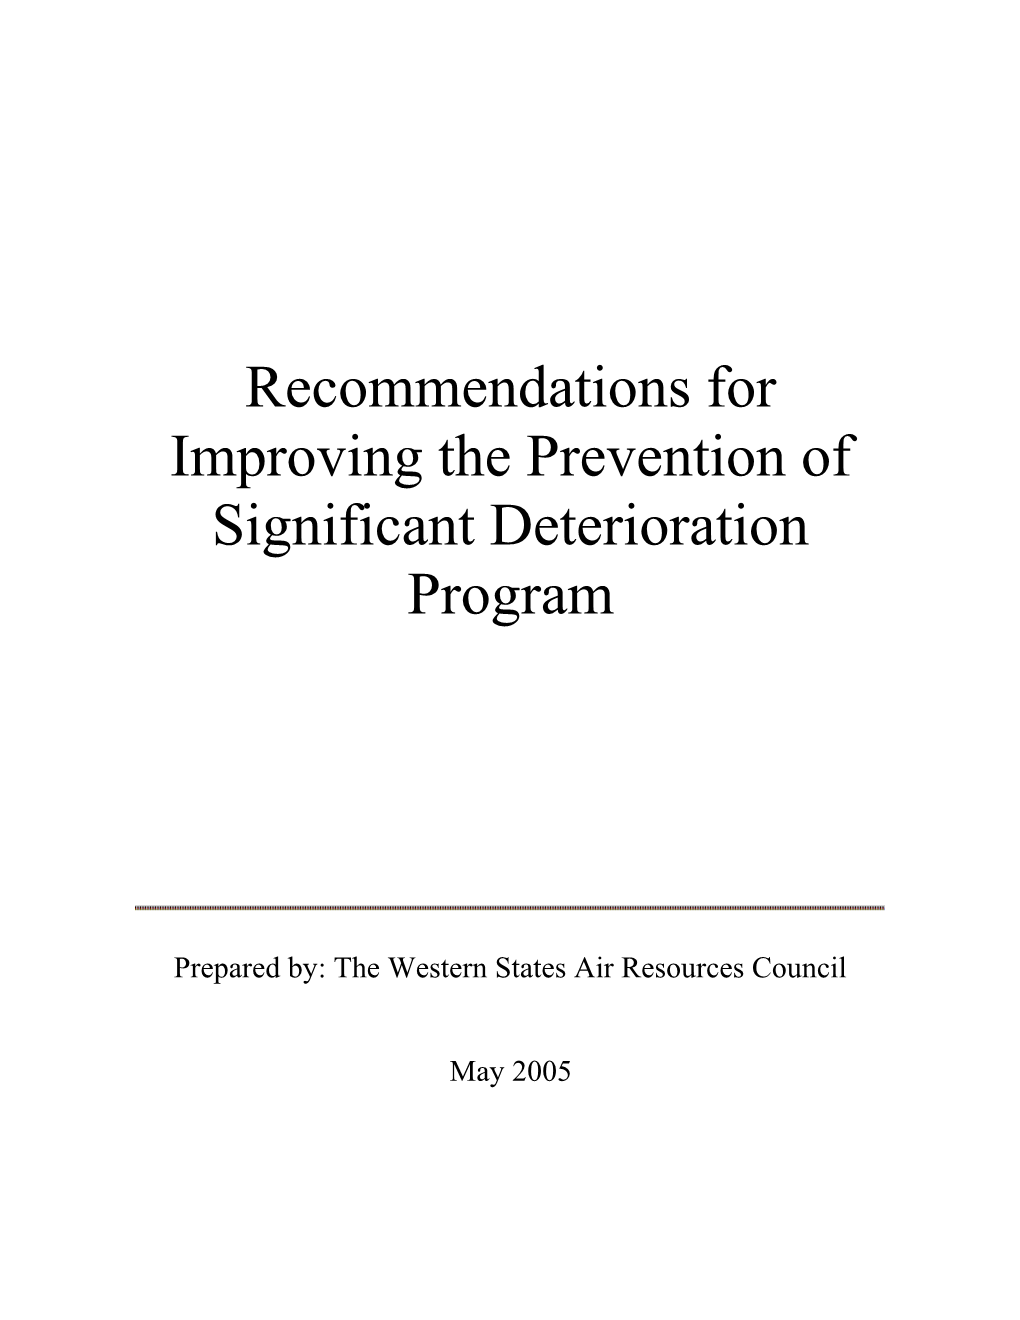 Recommendations for Improving the Prevention of Significant Deterioration Program